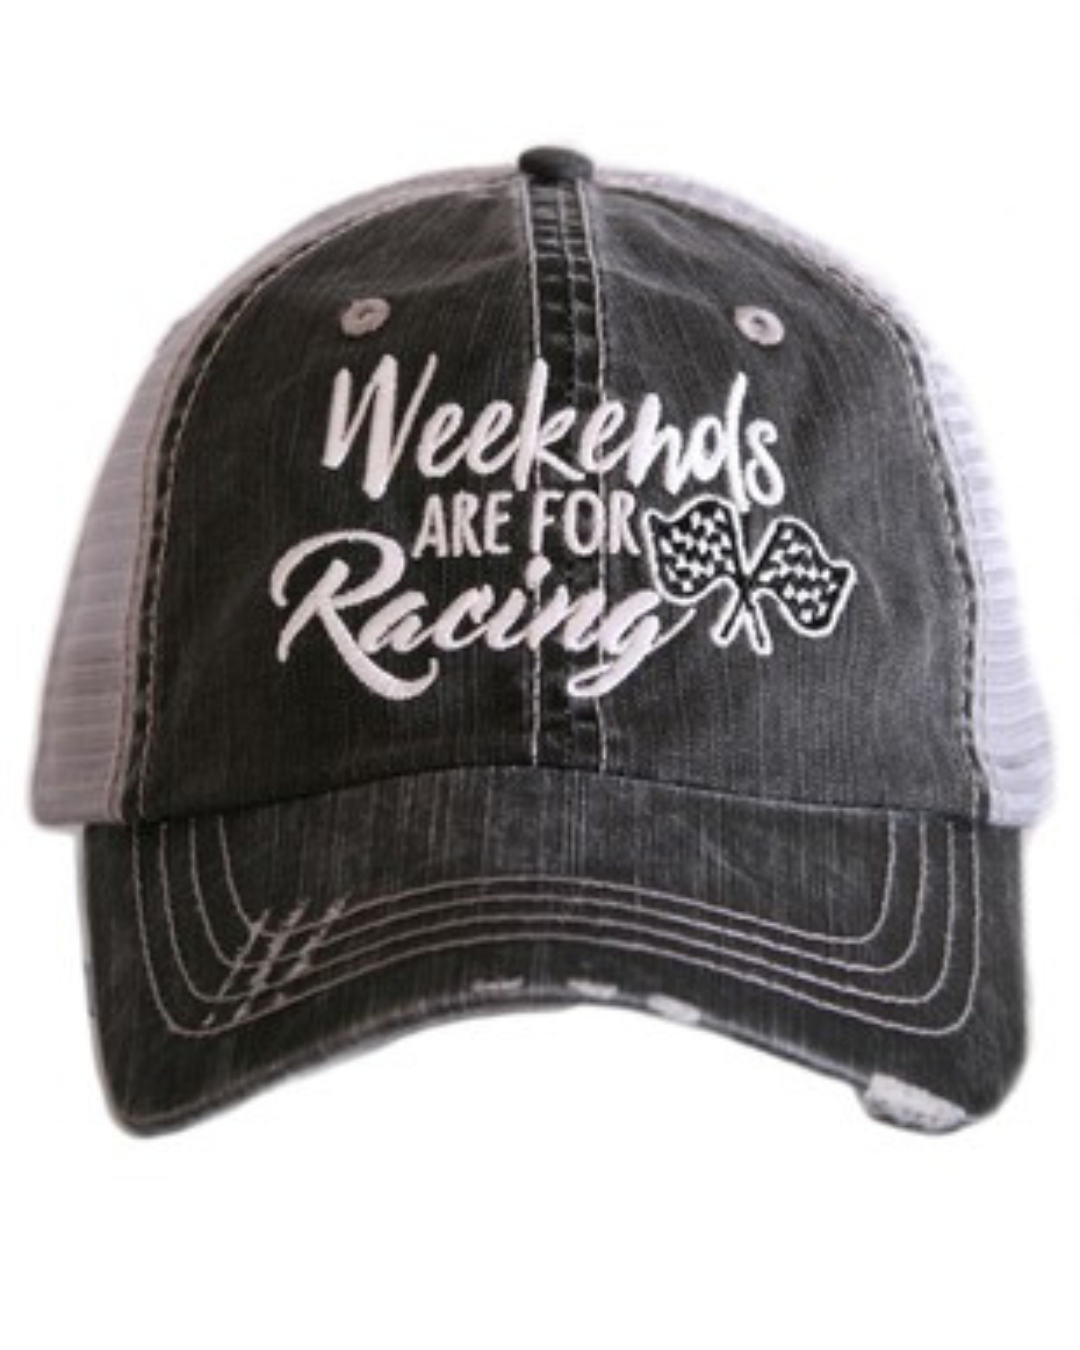 Weekends Are For Racing Hat